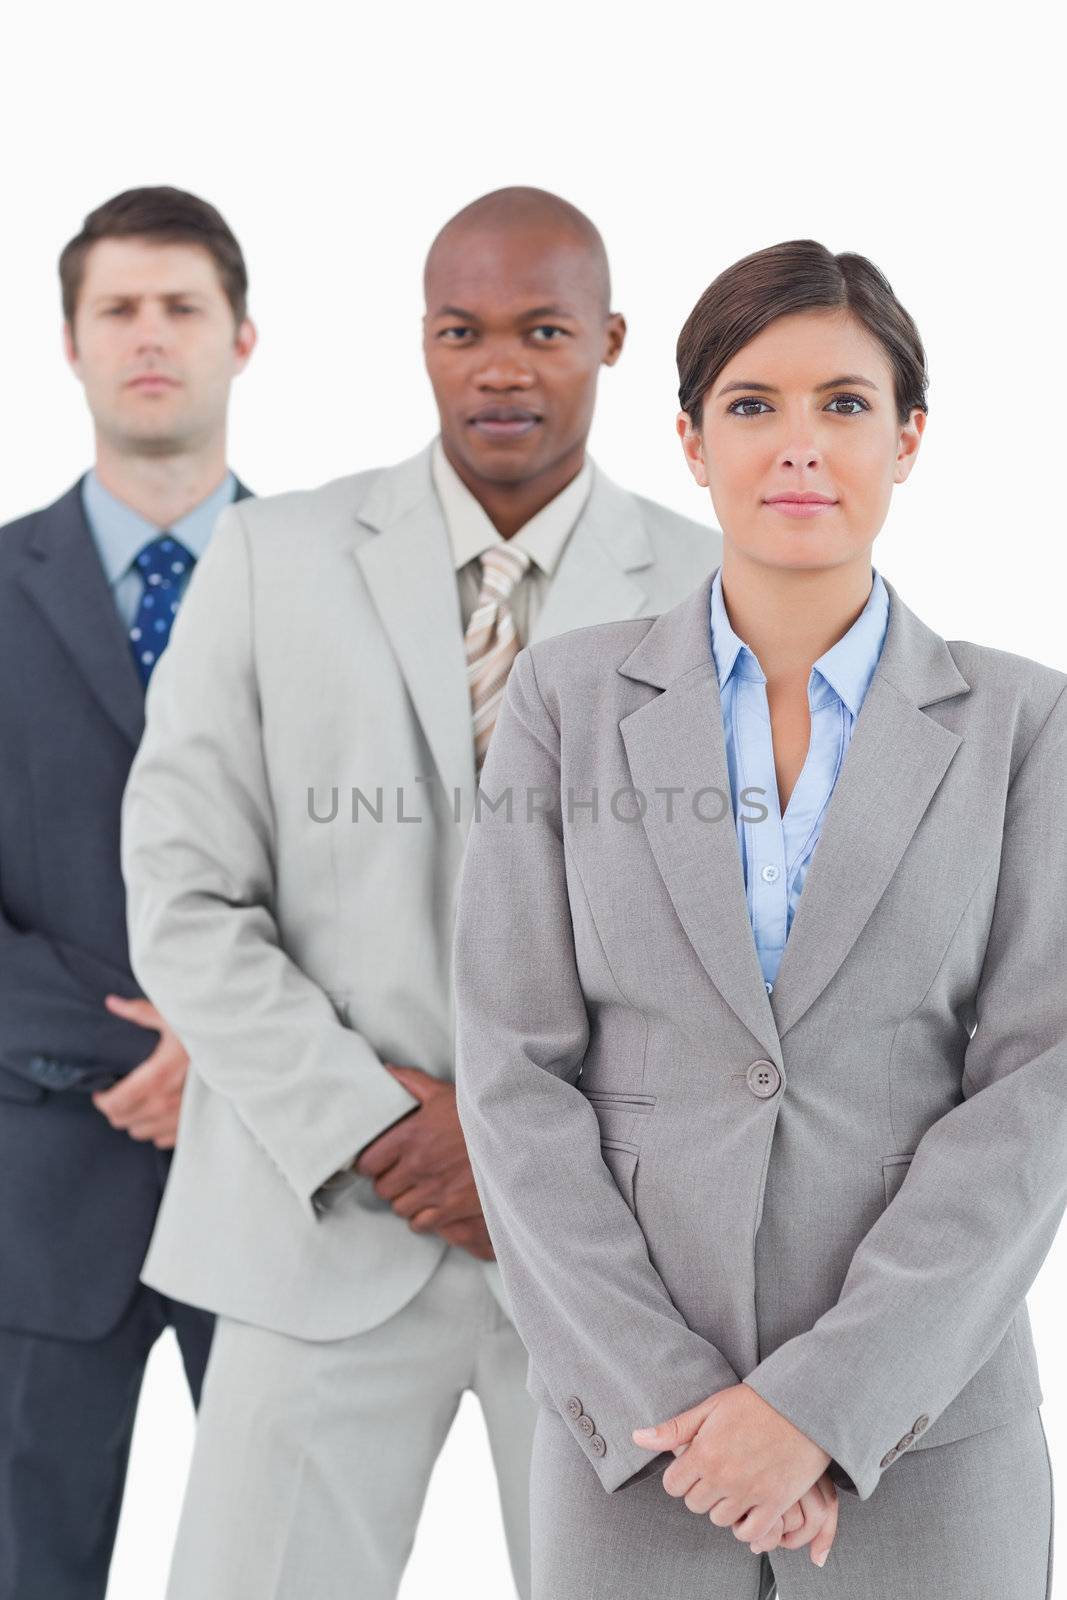 Young salesteam standing together against a white background